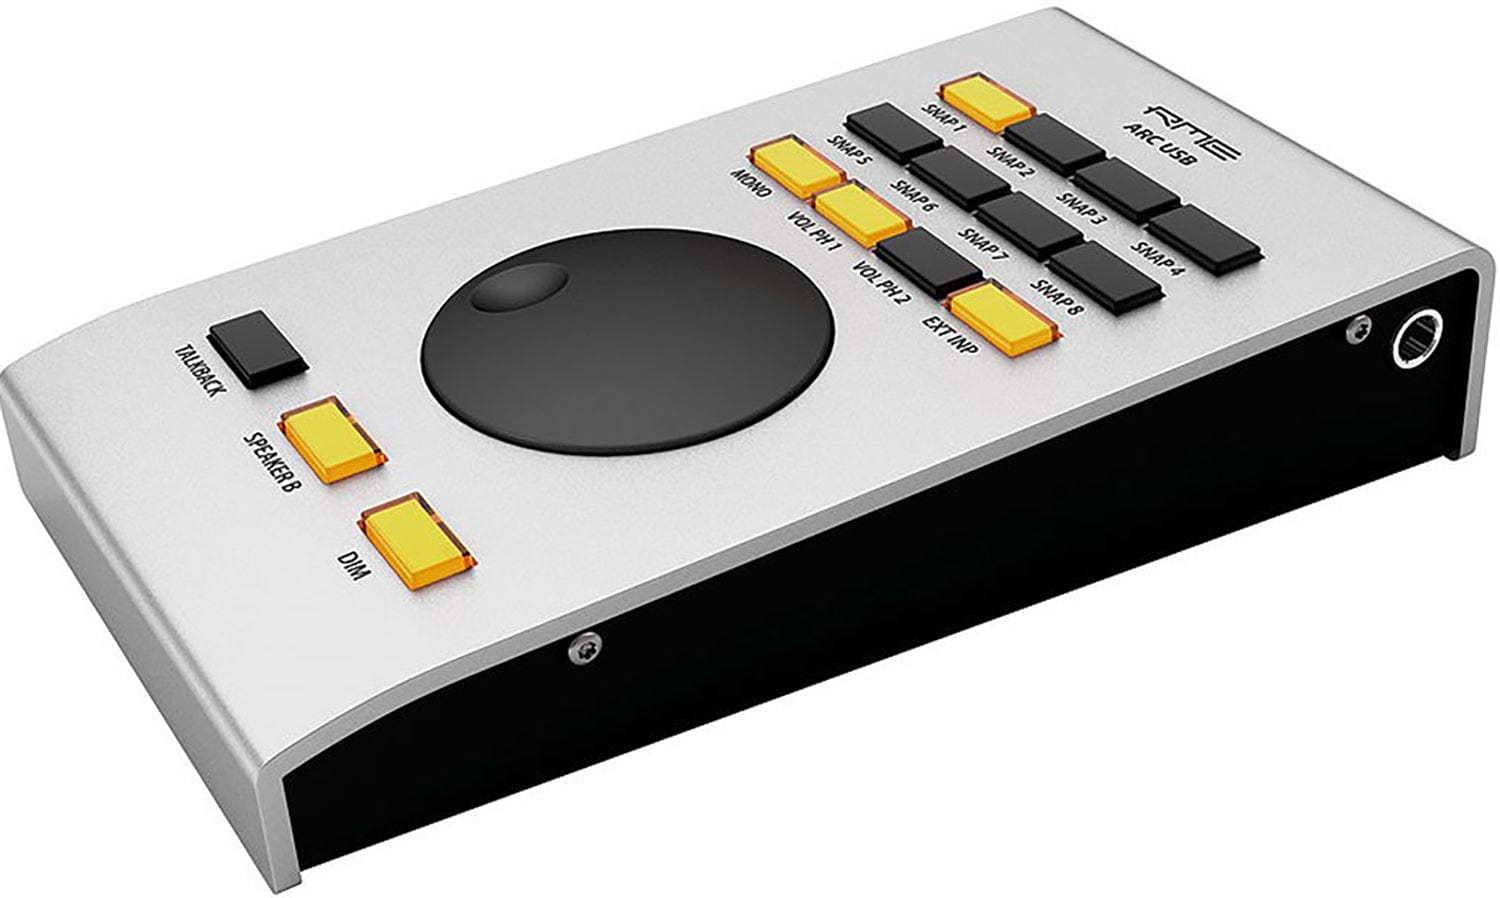 RME ARC-USB Advanced USB Remote Control Programmable Unit for TotalMix FX - Fireface UFX+ - UFX II - PSSL ProSound and Stage Lighting